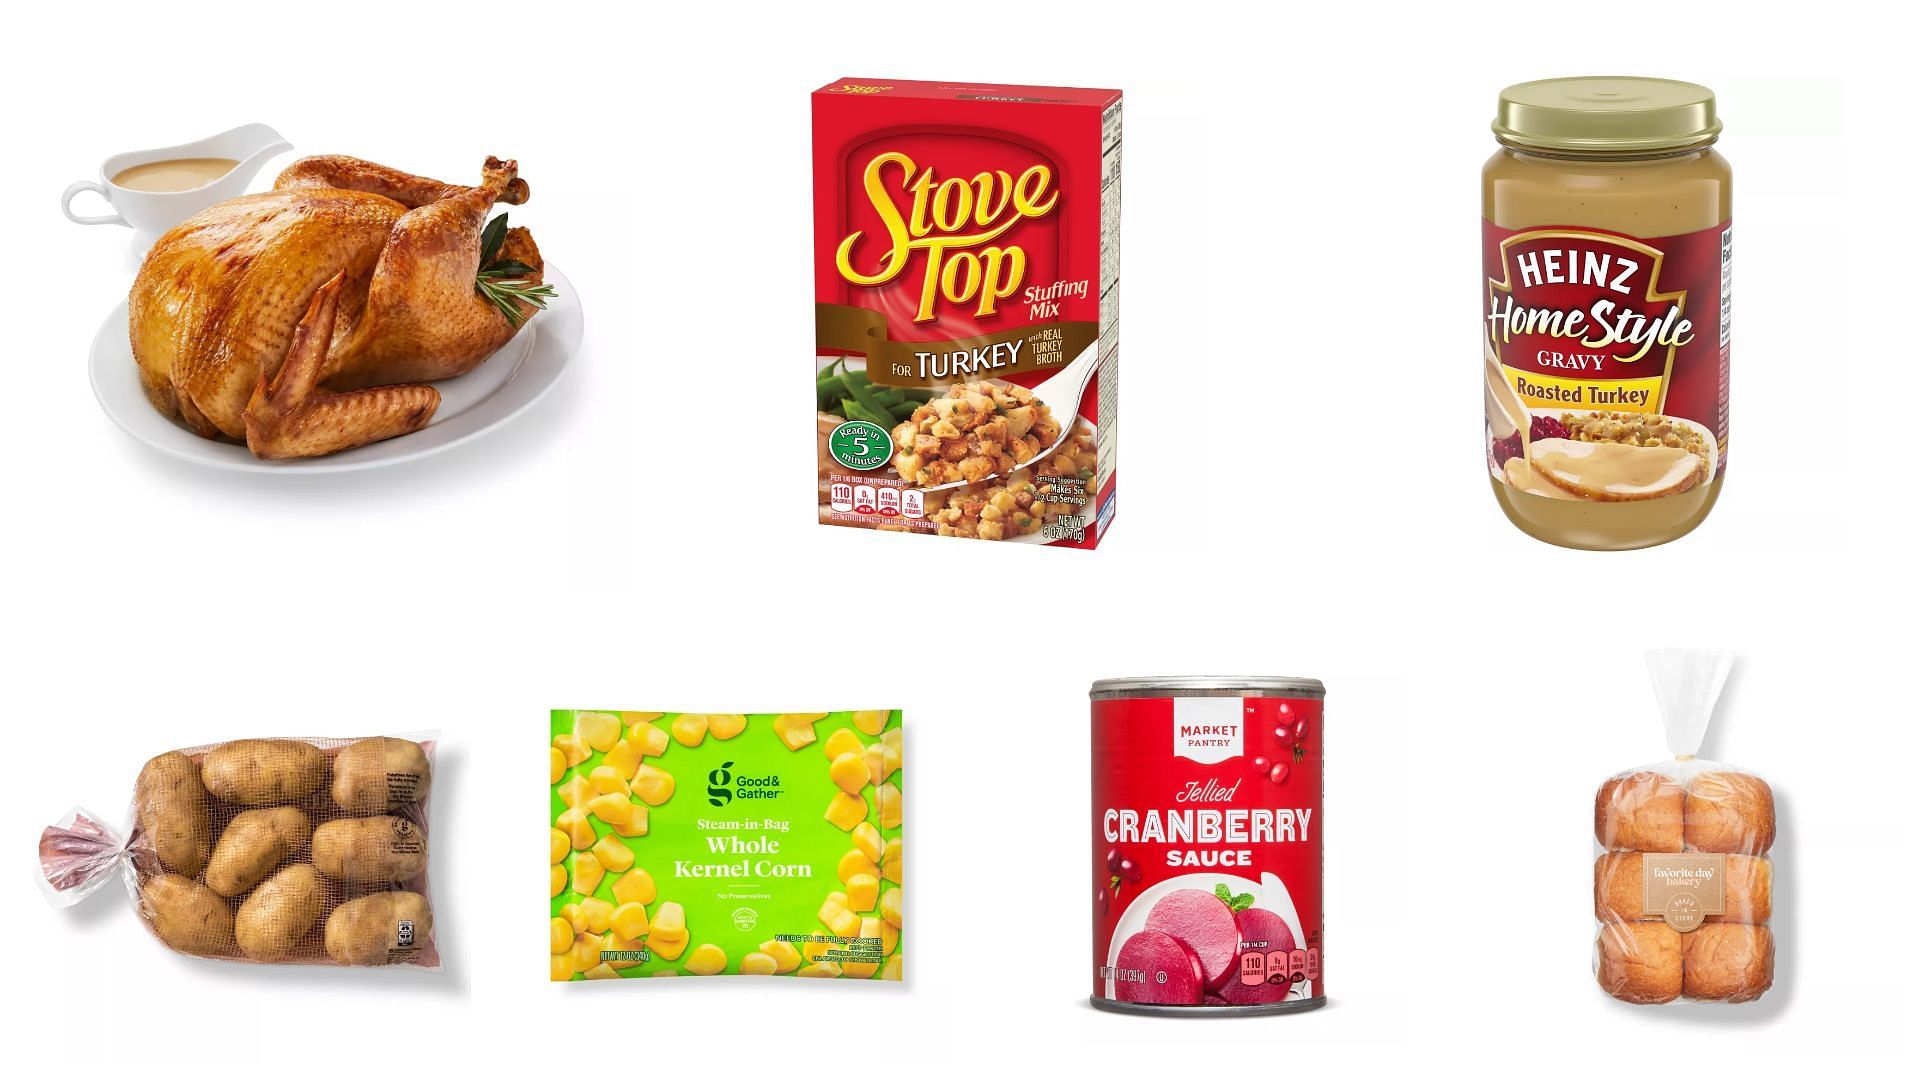 All items in the Thanksgiving bundle are available for $25 (Image via Target)